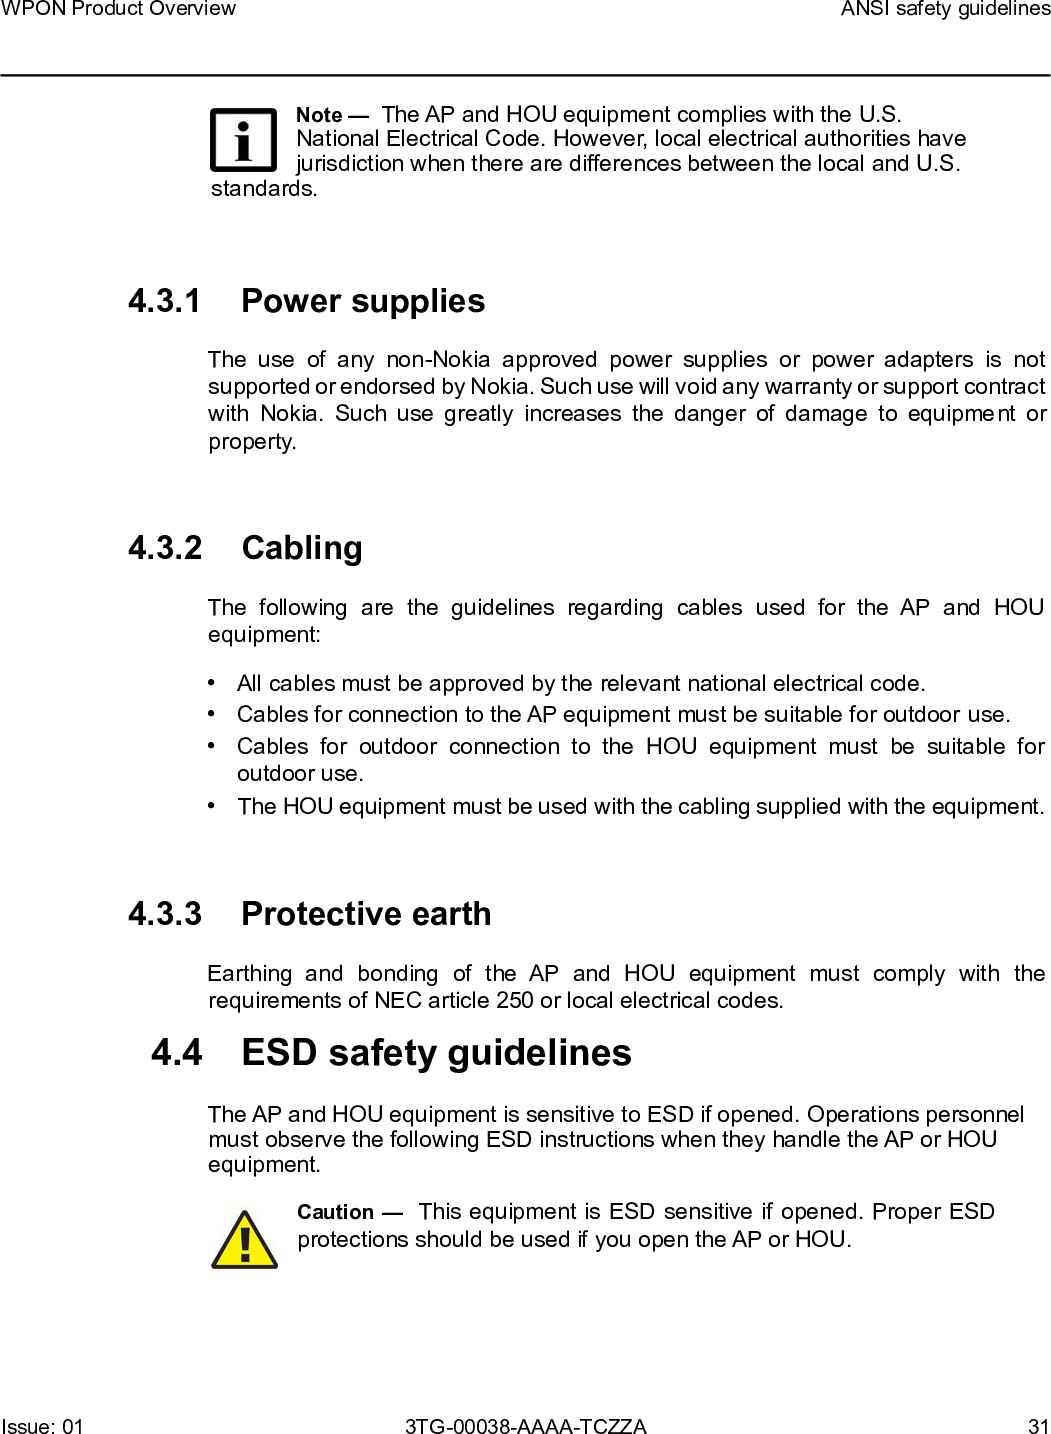 Page 31 of Nokia Bell 7577WPONAPDC WPON User Manual WPON Product Overview